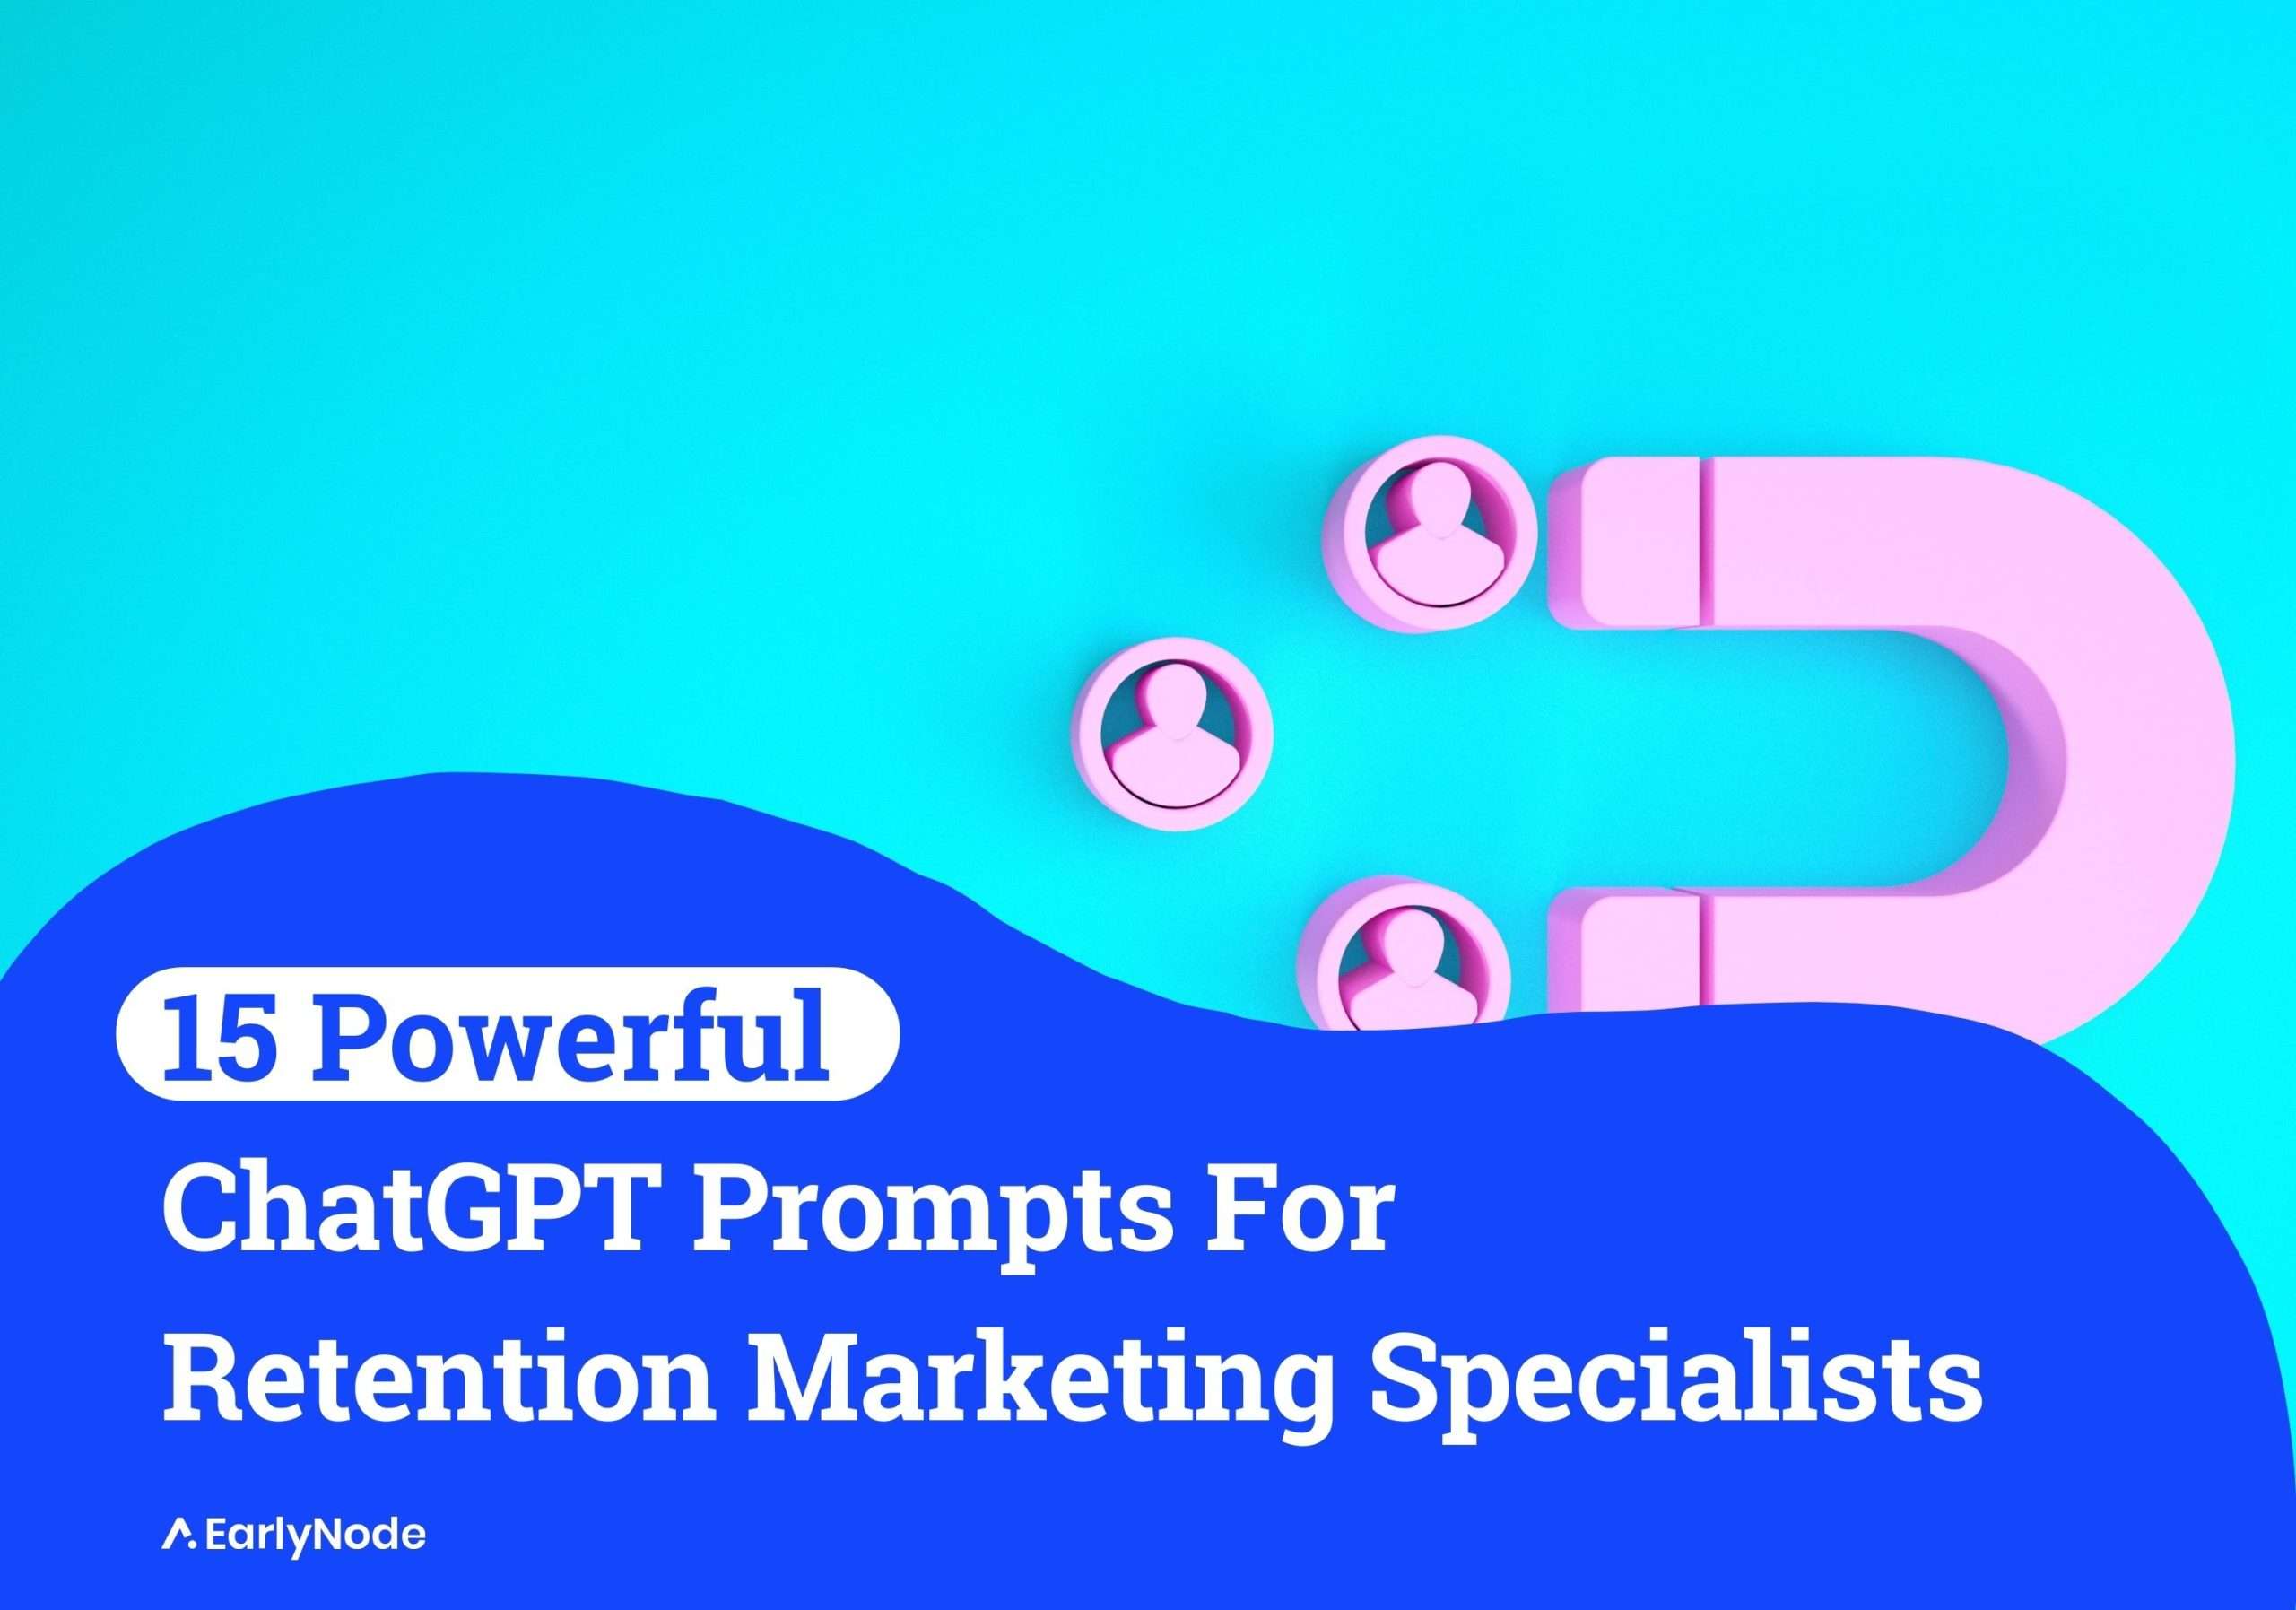 15+ Powerful ChatGPT Prompts for Retention Marketing Specialists